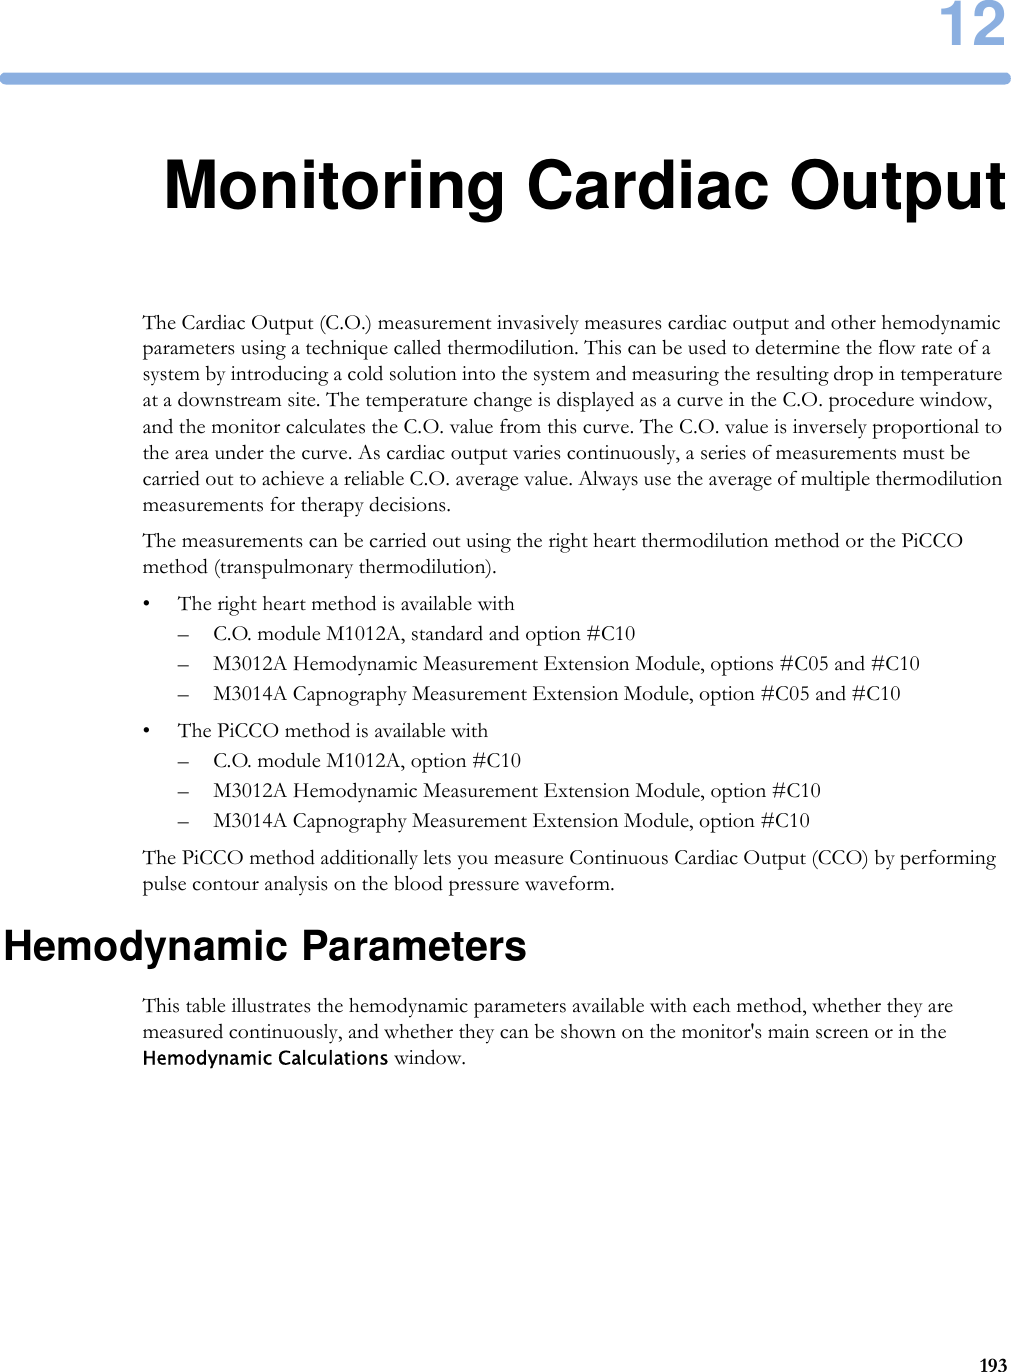 1219312Monitoring Cardiac OutputThe Cardiac Output (C.O.) measurement invasively measures cardiac output and other hemodynamic parameters using a technique called thermodilution. This can be used to determine the flow rate of a system by introducing a cold solution into the system and measuring the resulting drop in temperature at a downstream site. The temperature change is displayed as a curve in the C.O. procedure window, and the monitor calculates the C.O. value from this curve. The C.O. value is inversely proportional to the area under the curve. As cardiac output varies continuously, a series of measurements must be carried out to achieve a reliable C.O. average value. Always use the average of multiple thermodilution measurements for therapy decisions.The measurements can be carried out using the right heart thermodilution method or the PiCCO method (transpulmonary thermodilution).• The right heart method is available with– C.O. module M1012A, standard and option #C10– M3012A Hemodynamic Measurement Extension Module, options #C05 and #C10– M3014A Capnography Measurement Extension Module, option #C05 and #C10• The PiCCO method is available with– C.O. module M1012A, option #C10– M3012A Hemodynamic Measurement Extension Module, option #C10– M3014A Capnography Measurement Extension Module, option #C10The PiCCO method additionally lets you measure Continuous Cardiac Output (CCO) by performing pulse contour analysis on the blood pressure waveform.Hemodynamic ParametersThis table illustrates the hemodynamic parameters available with each method, whether they are measured continuously, and whether they can be shown on the monitor&apos;s main screen or in the Hemodynamic Calculations window.